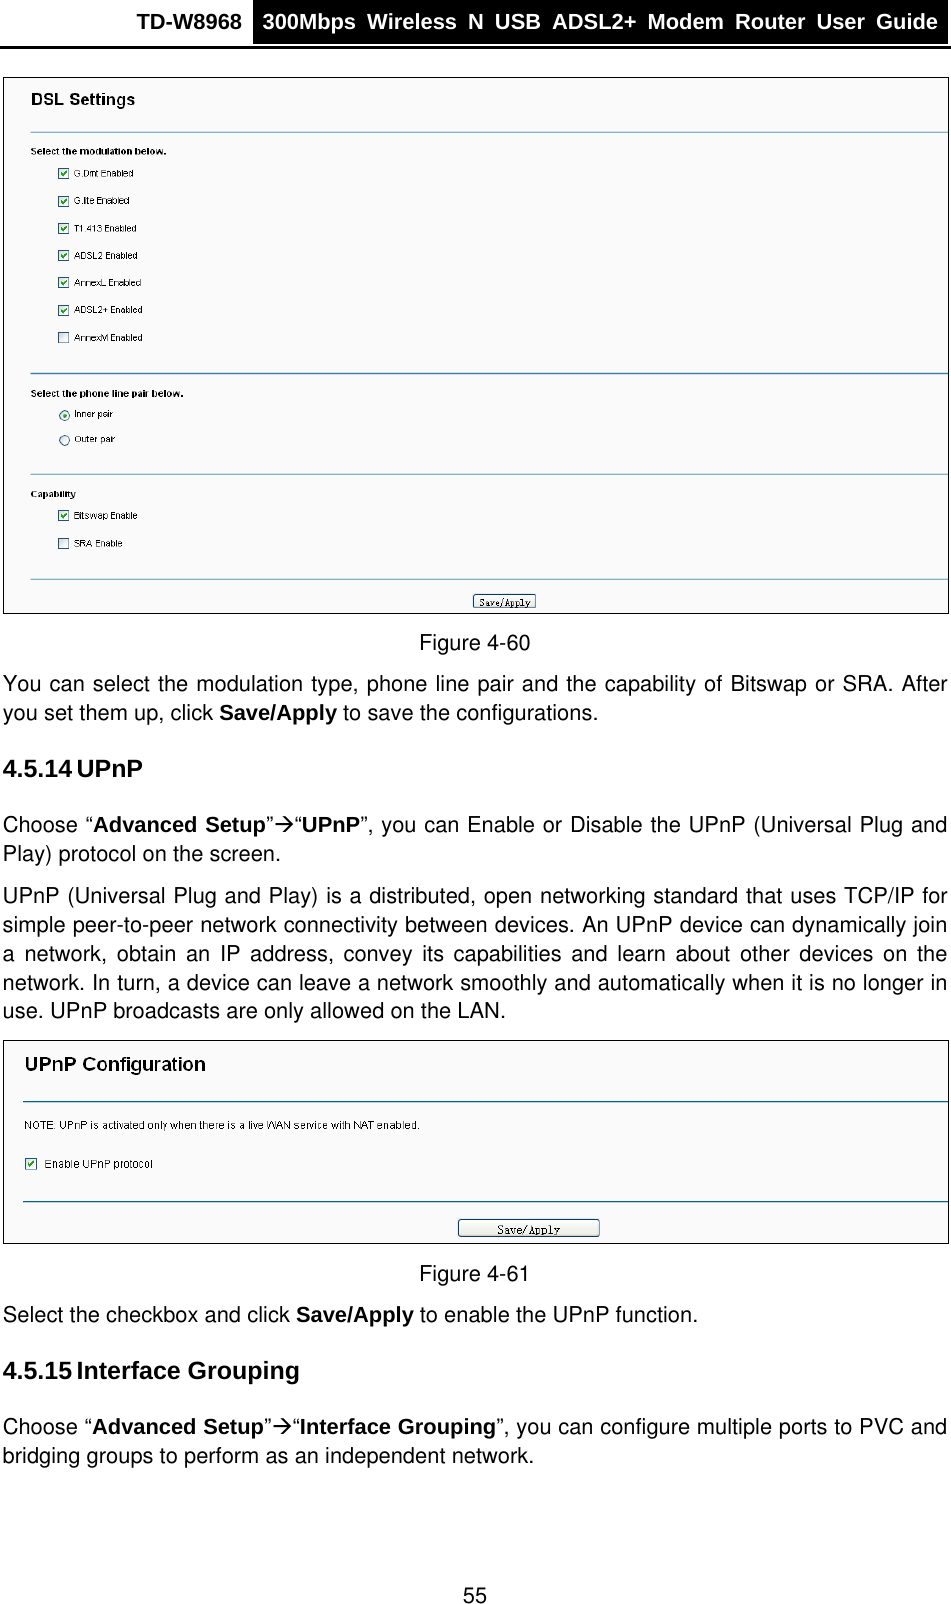 TD-W8968  300Mbps Wireless N USB ADSL2+ Modem Router User Guide   Figure 4-60 You can select the modulation type, phone line pair and the capability of Bitswap or SRA. After you set them up, click Save/Apply to save the configurations. 4.5.14 UPnP Choose “Advanced Setup”Æ“UPnP”, you can Enable or Disable the UPnP (Universal Plug and Play) protocol on the screen.   UPnP (Universal Plug and Play) is a distributed, open networking standard that uses TCP/IP for simple peer-to-peer network connectivity between devices. An UPnP device can dynamically join a network, obtain an IP address, convey its capabilities and learn about other devices on the network. In turn, a device can leave a network smoothly and automatically when it is no longer in use. UPnP broadcasts are only allowed on the LAN.  Figure 4-61 Select the checkbox and click Save/Apply to enable the UPnP function. 4.5.15 Interface Grouping Choose “Advanced Setup”Æ“Interface Grouping”, you can configure multiple ports to PVC and bridging groups to perform as an independent network. 55 